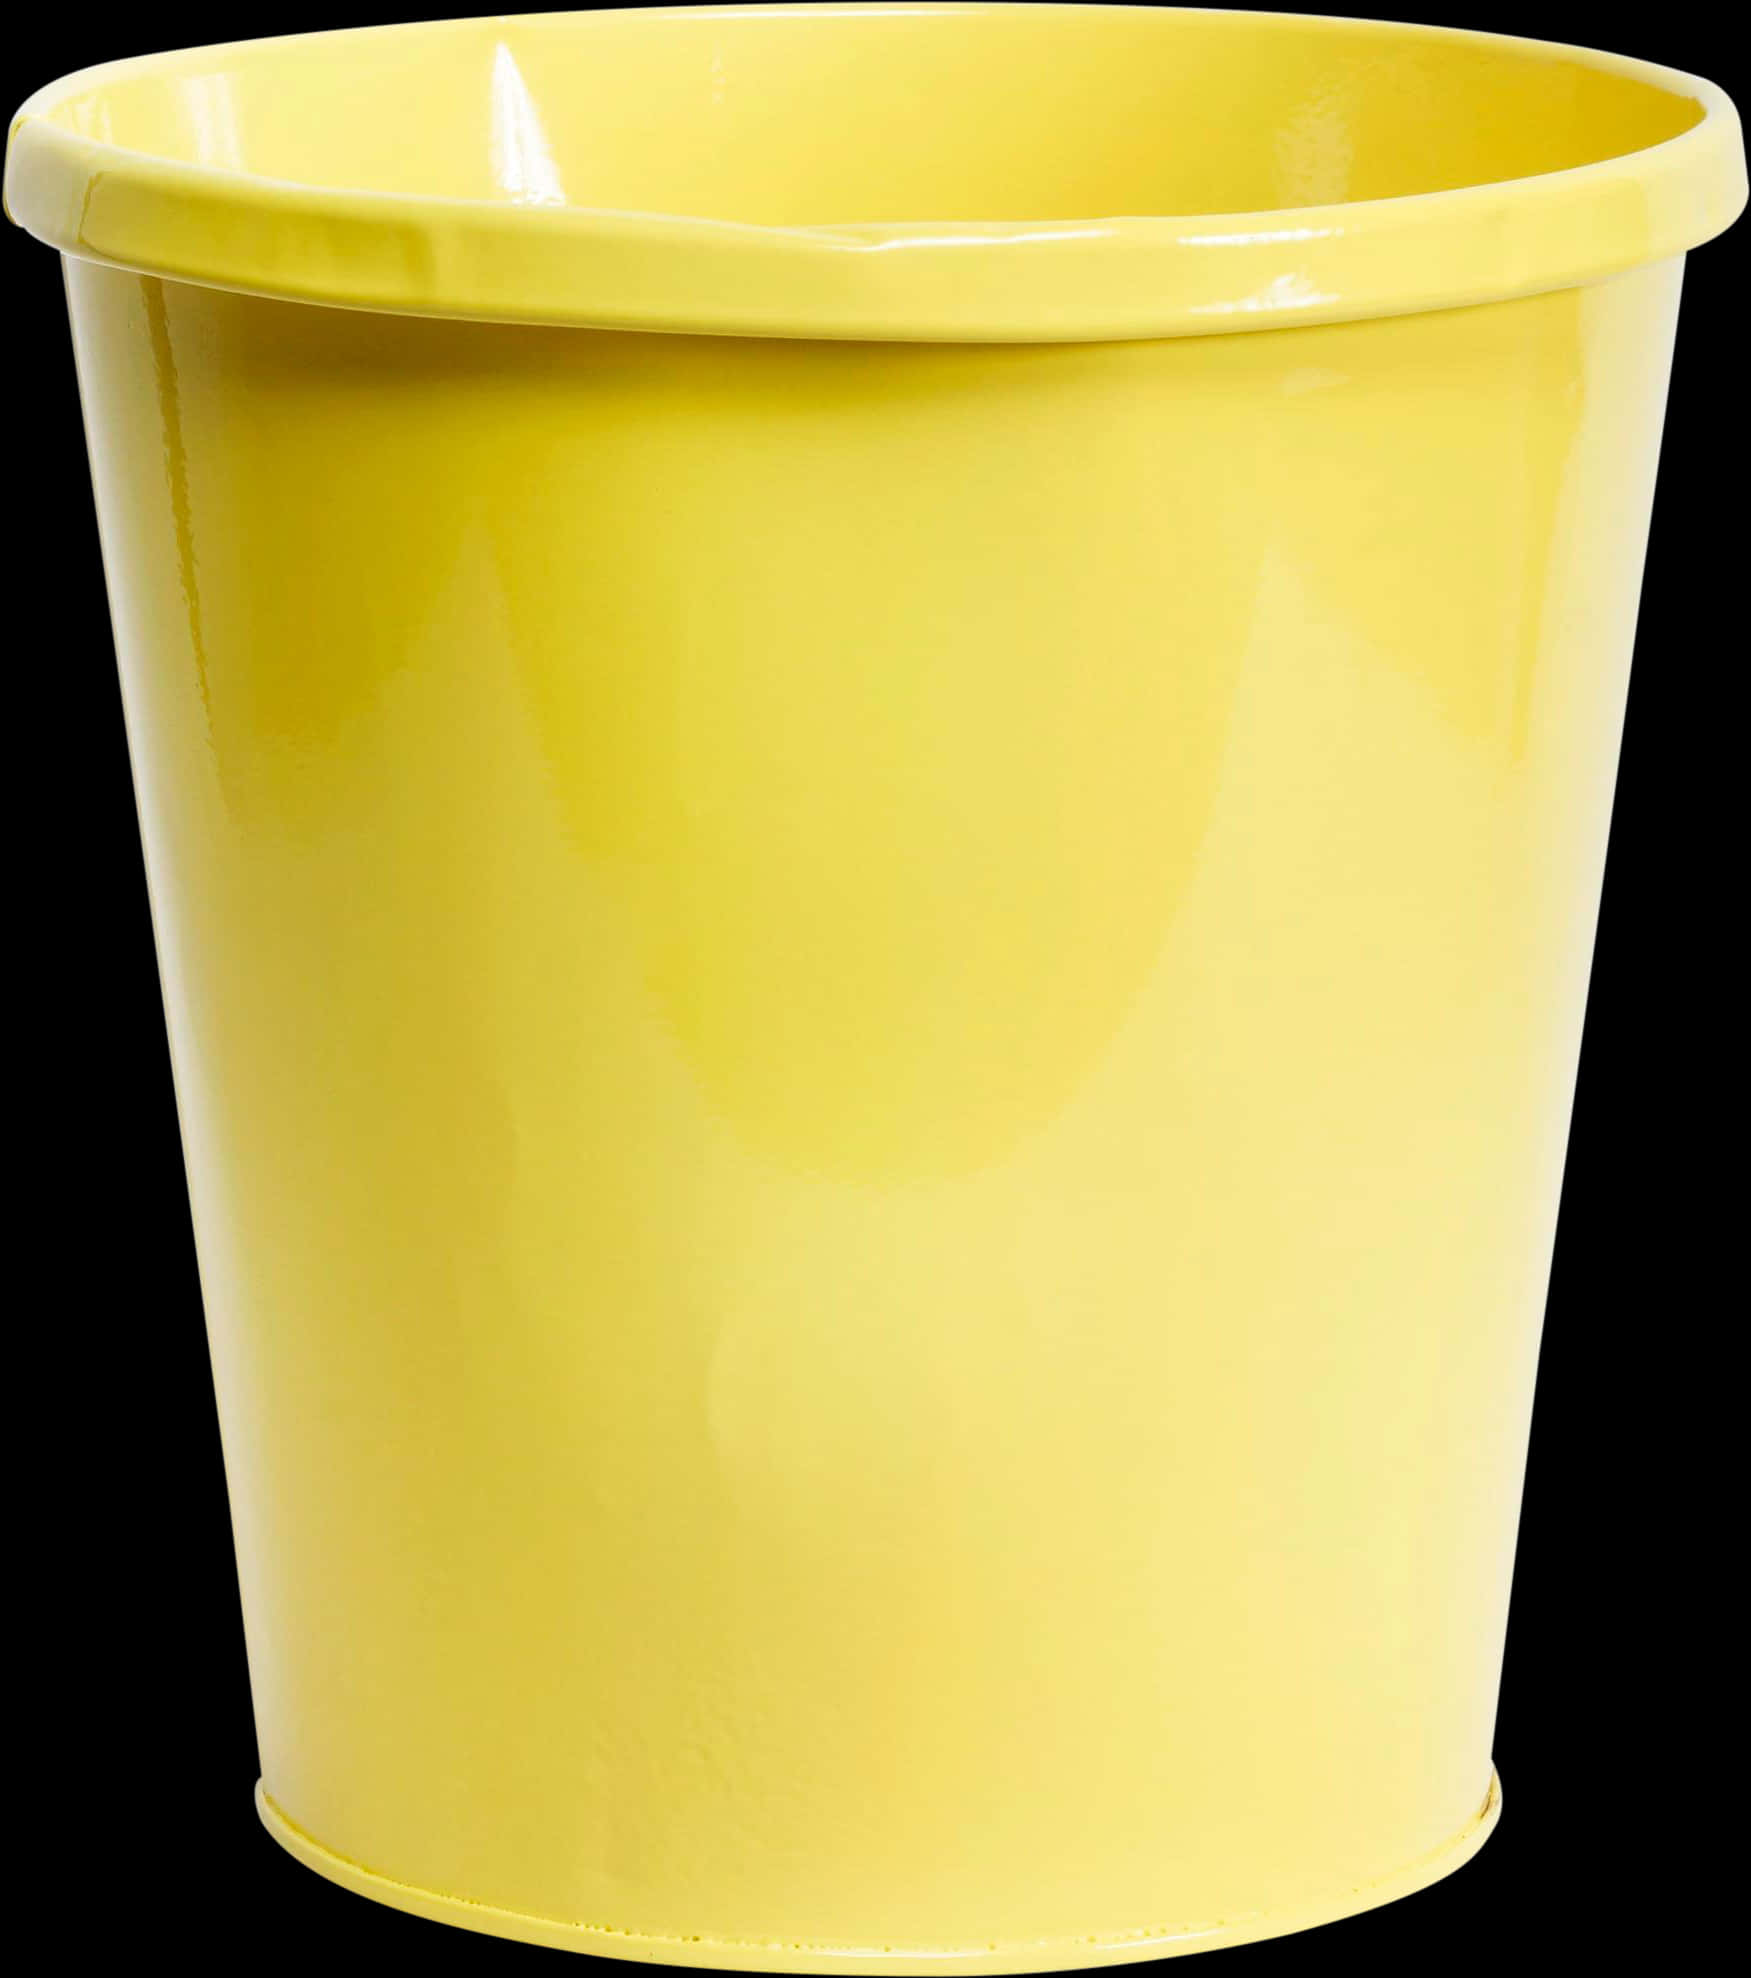 A Yellow Bucket With A Black Background